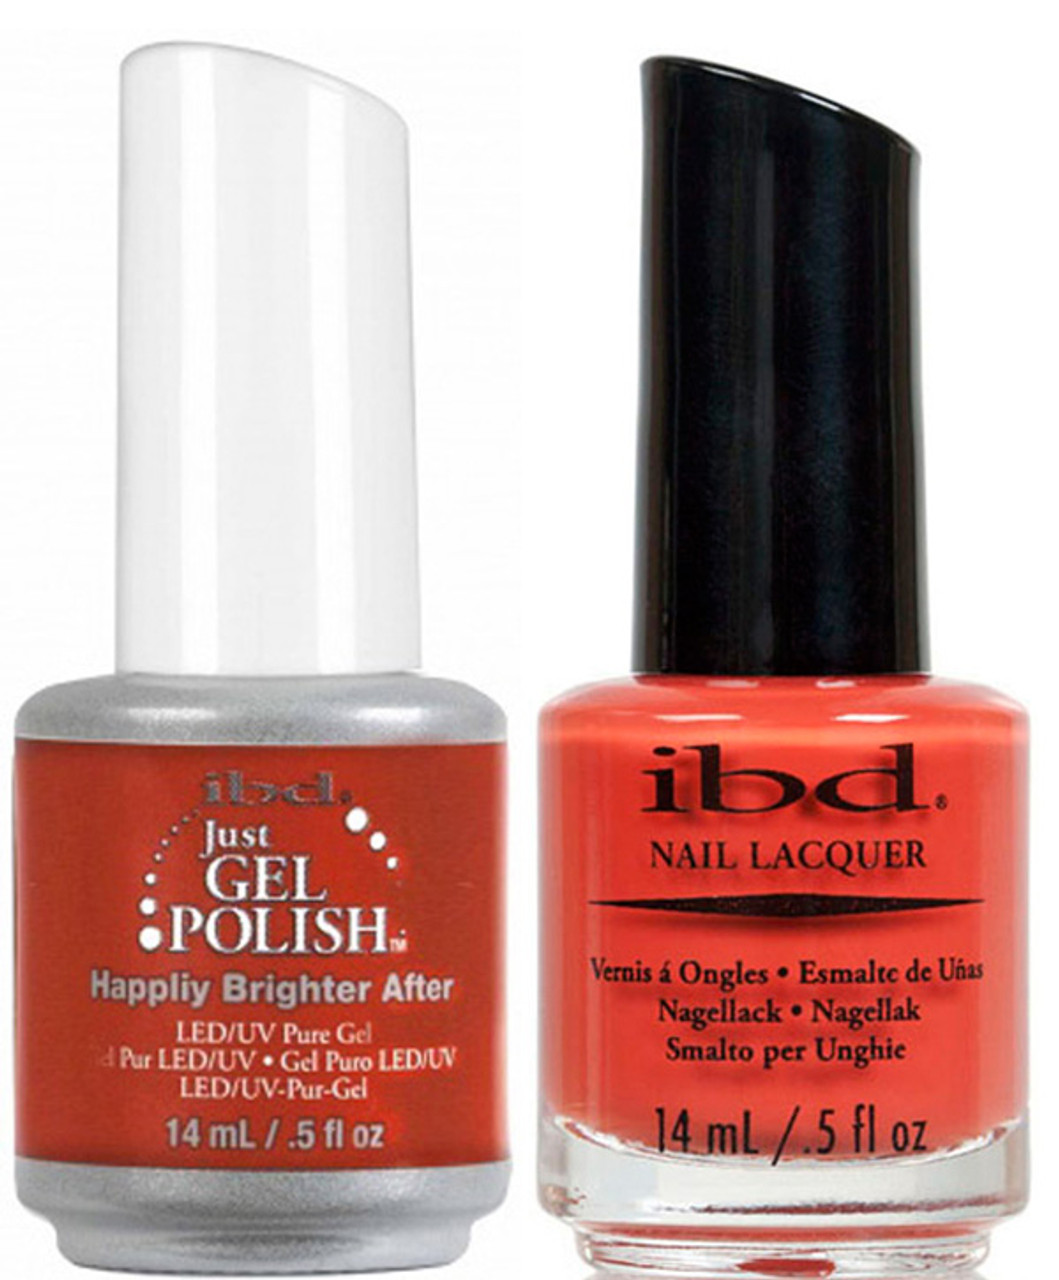 ibd Just Gel Polish & Nail Lacquer Happily Brighter After - .5oz